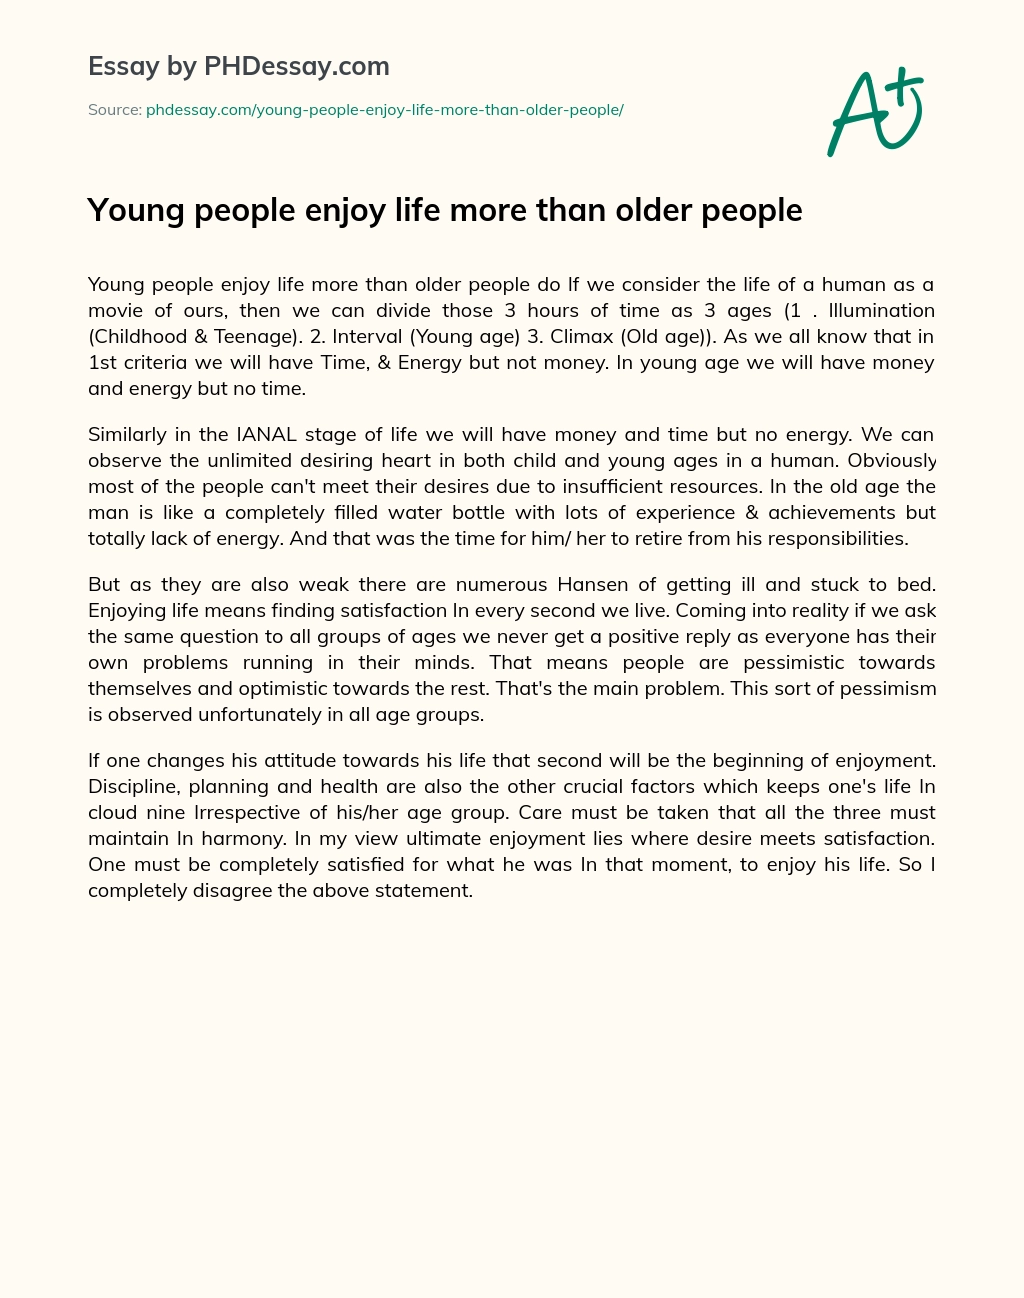 Young people enjoy life more than older people essay